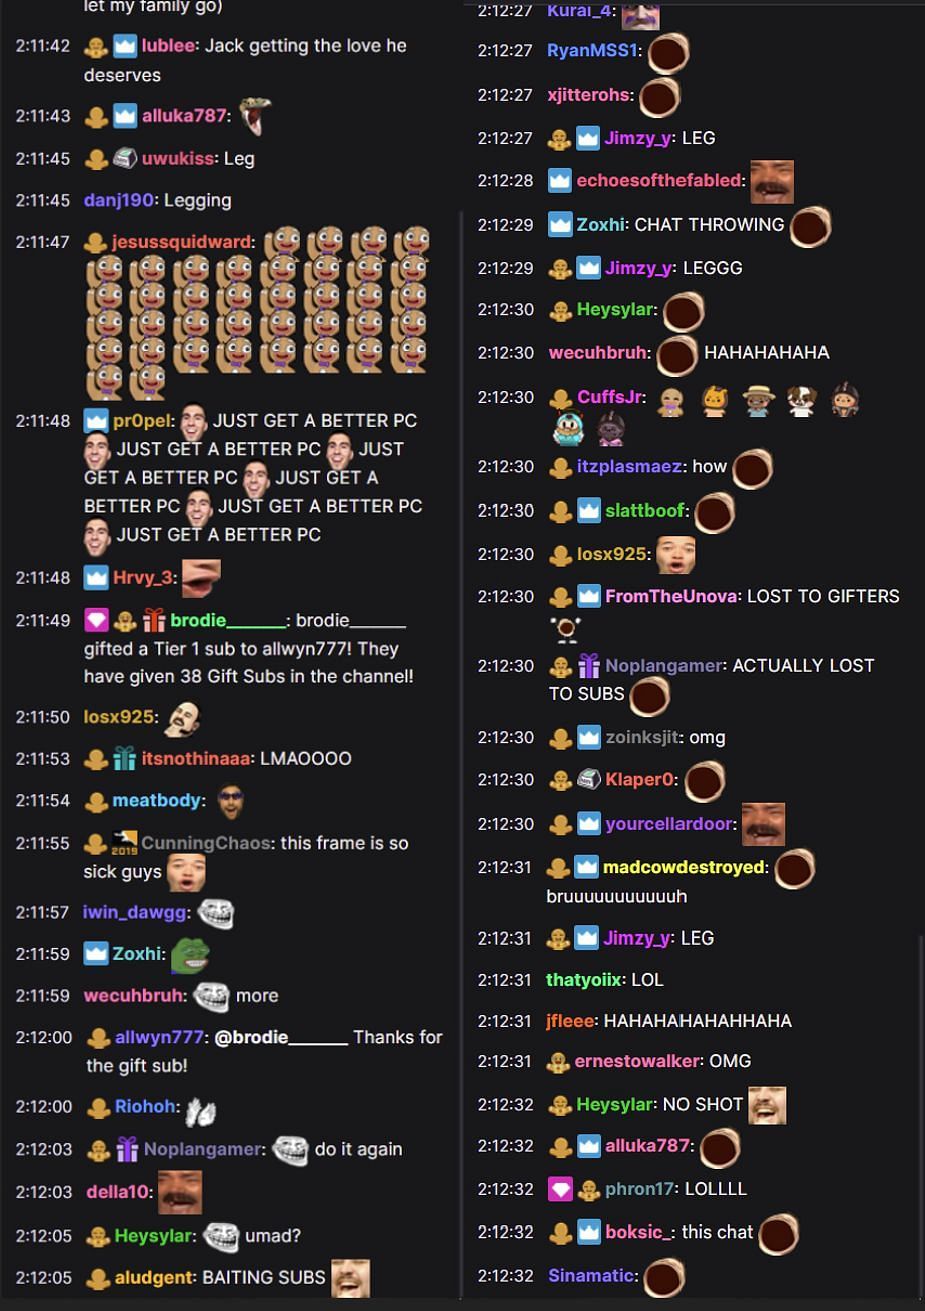 Fans reacting to the streamer&#039;s situation (Image via Jack/Twitch chat)